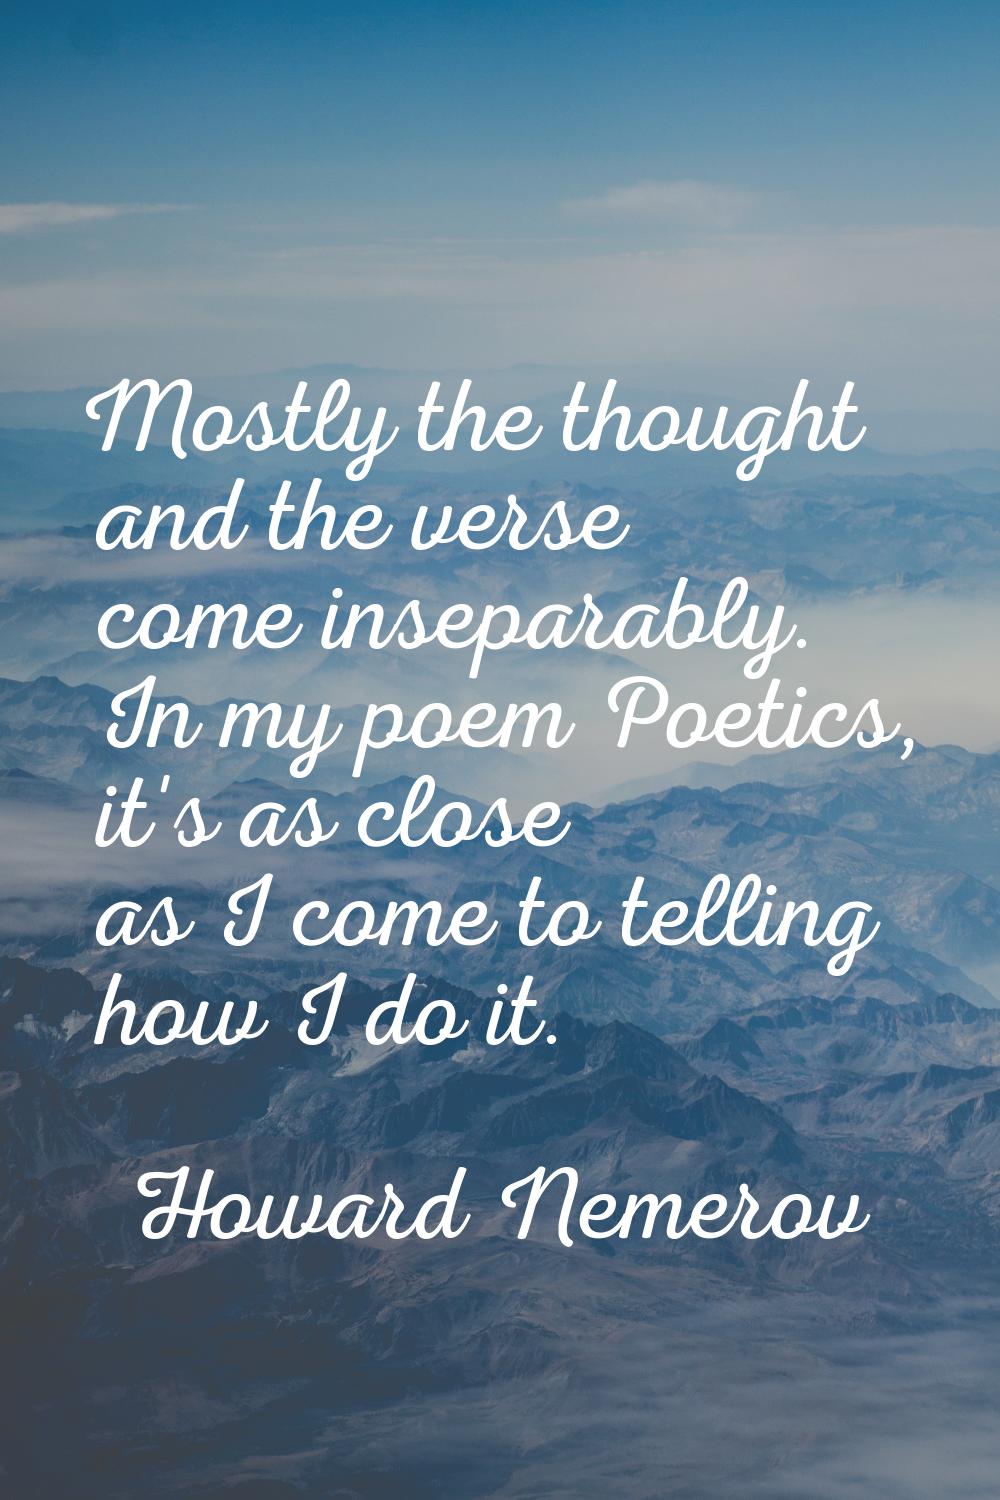 Mostly the thought and the verse come inseparably. In my poem Poetics, it's as close as I come to t